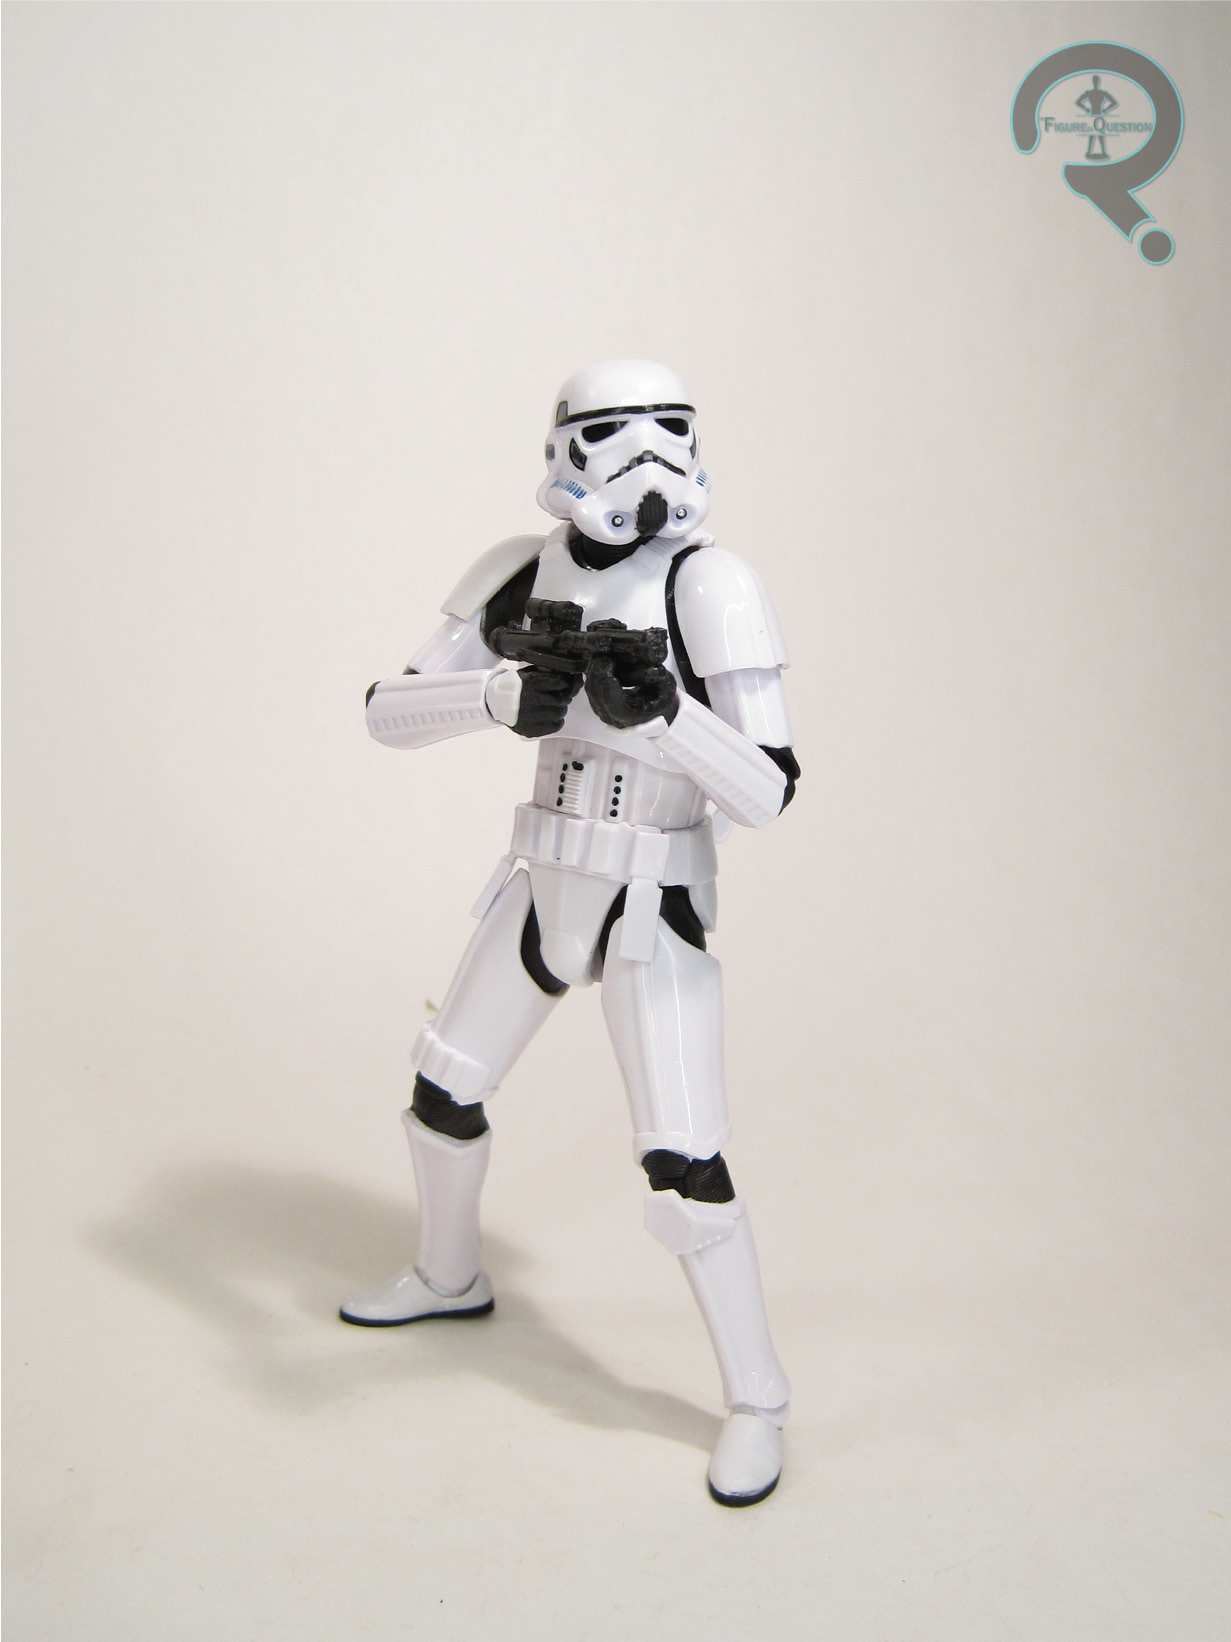 Details about   Star Wars Deluxe Crowd Control Stormtrooper MIB! Galactic Empire 69609 1996 